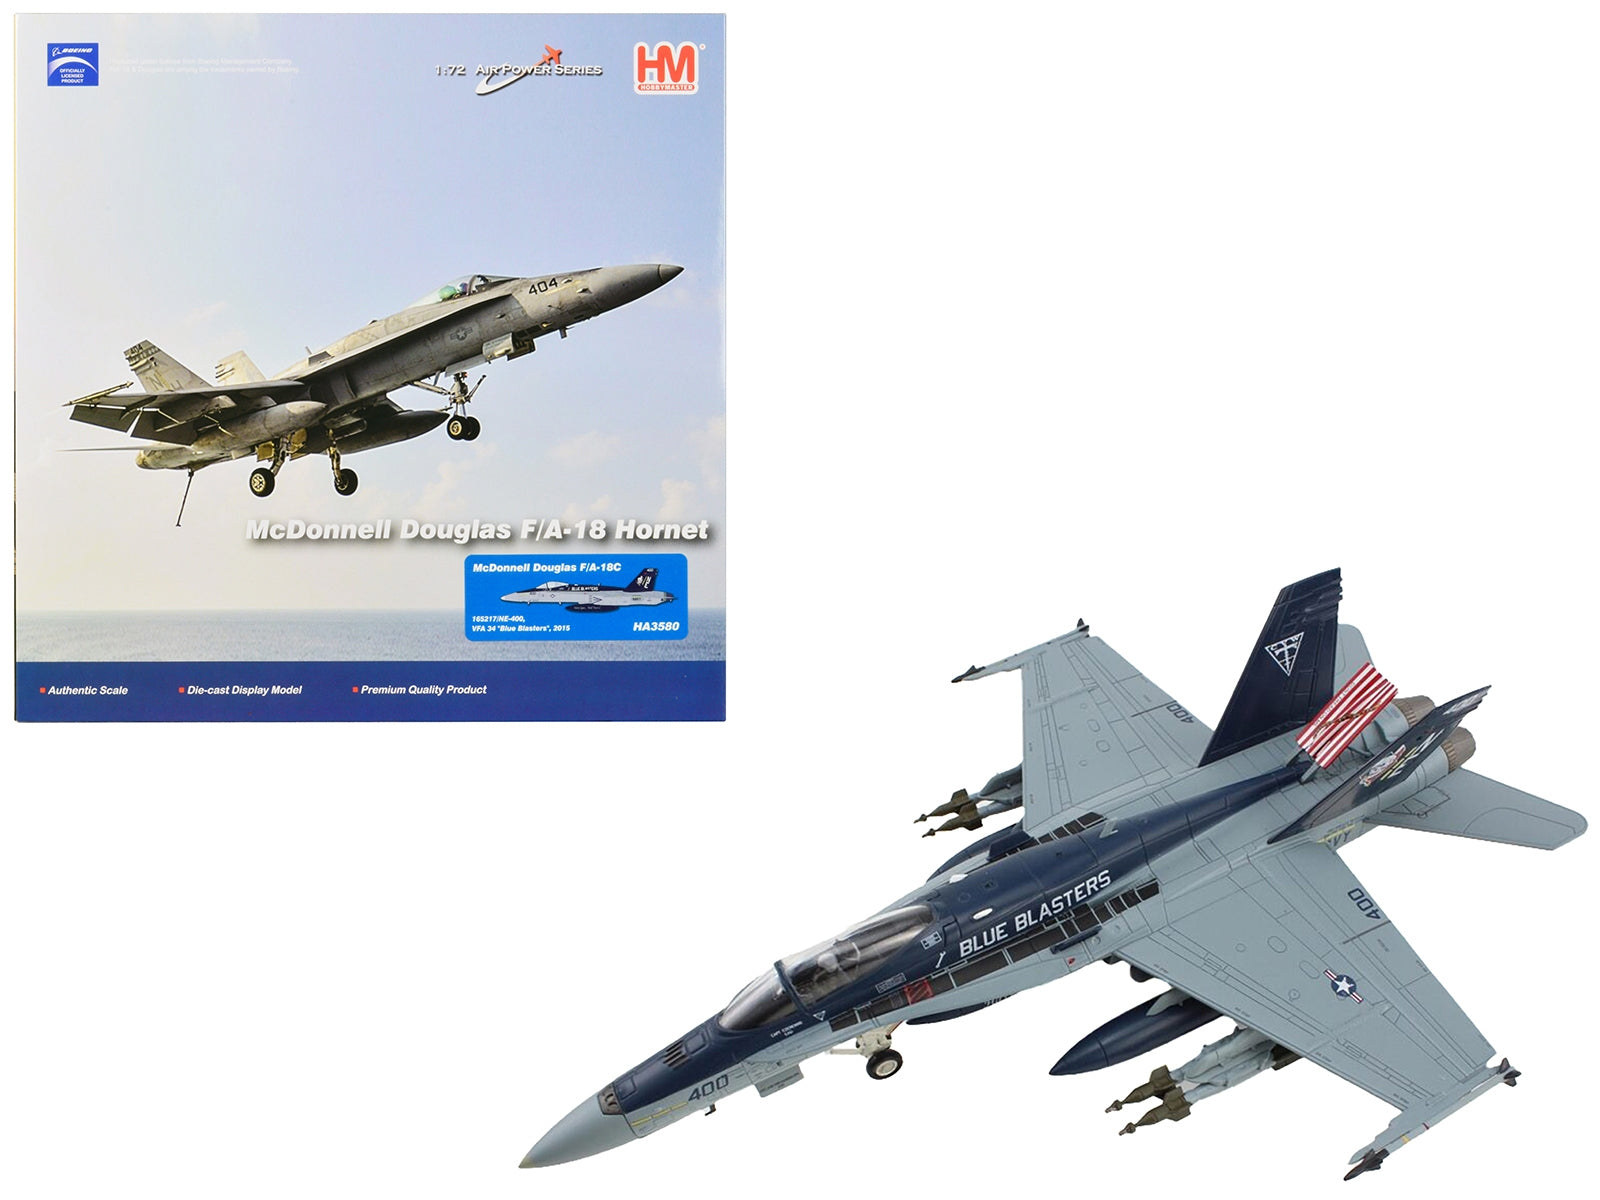 McDonnell Douglas F/A-18C Hornet Aircraft "NE400 VFA-34 Blue Blasters" (2015) United States Navy "Air Power Series" 1/72 Diecast Model by Hobby Master Hobby Master